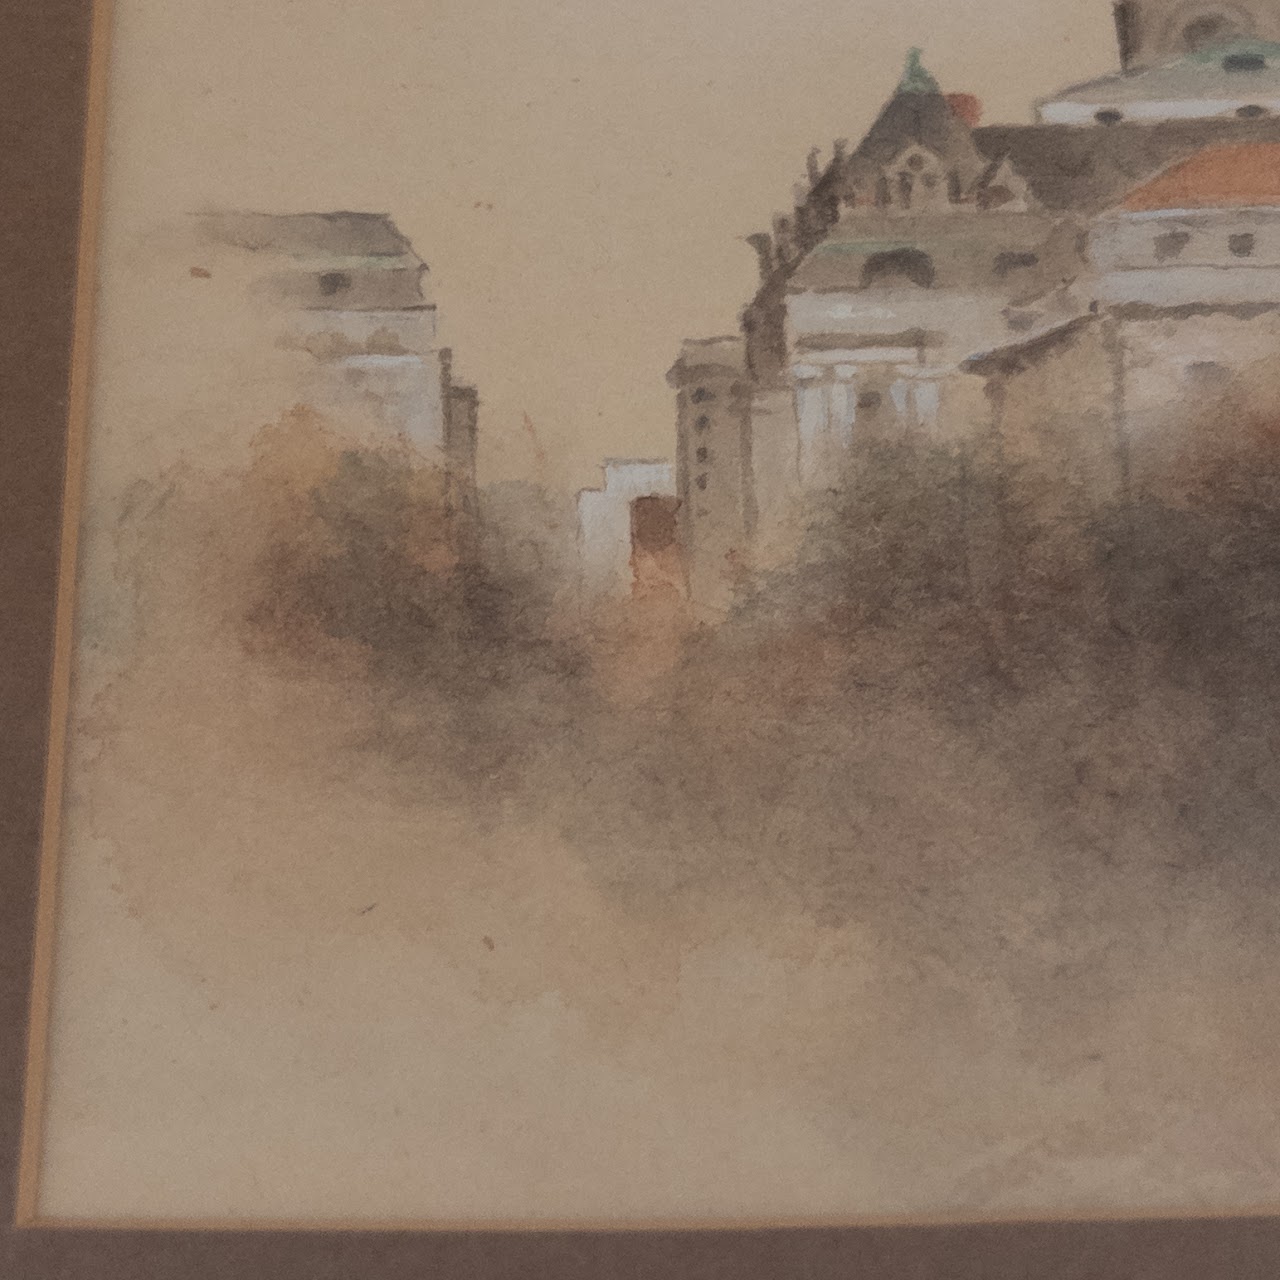 David Lee Signed Cityscape Painting